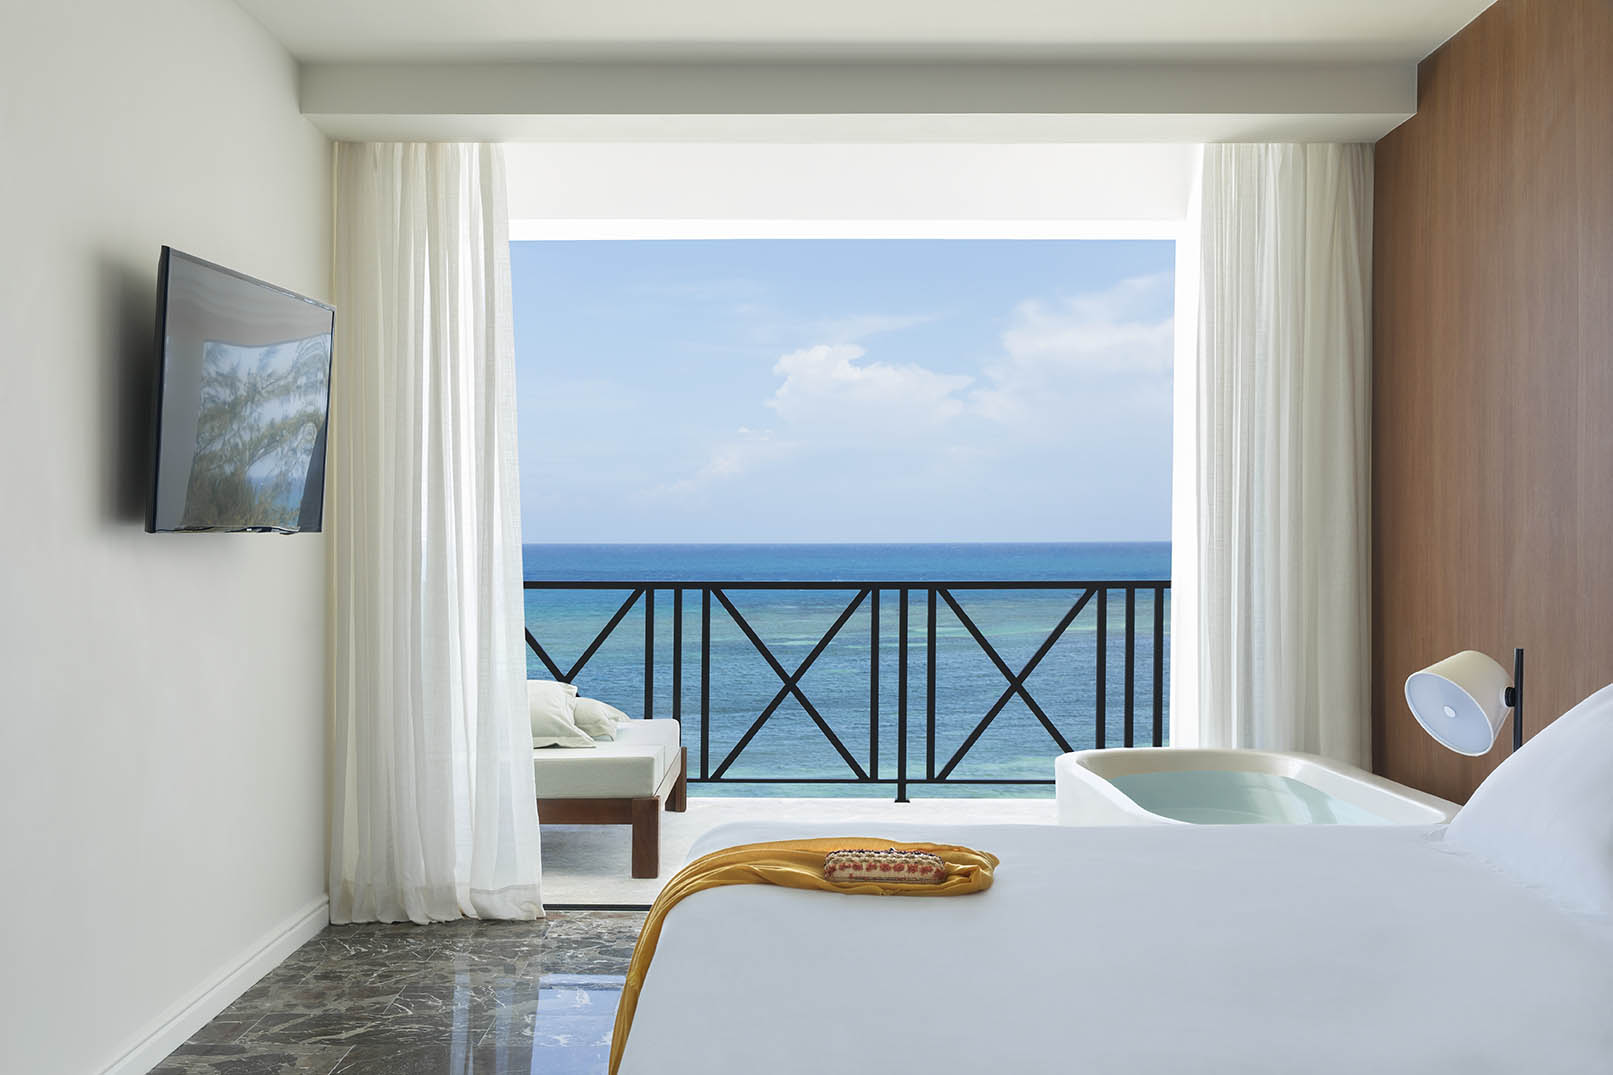 What Are The Most Romantic Suites For Your Caribbean Vacation?